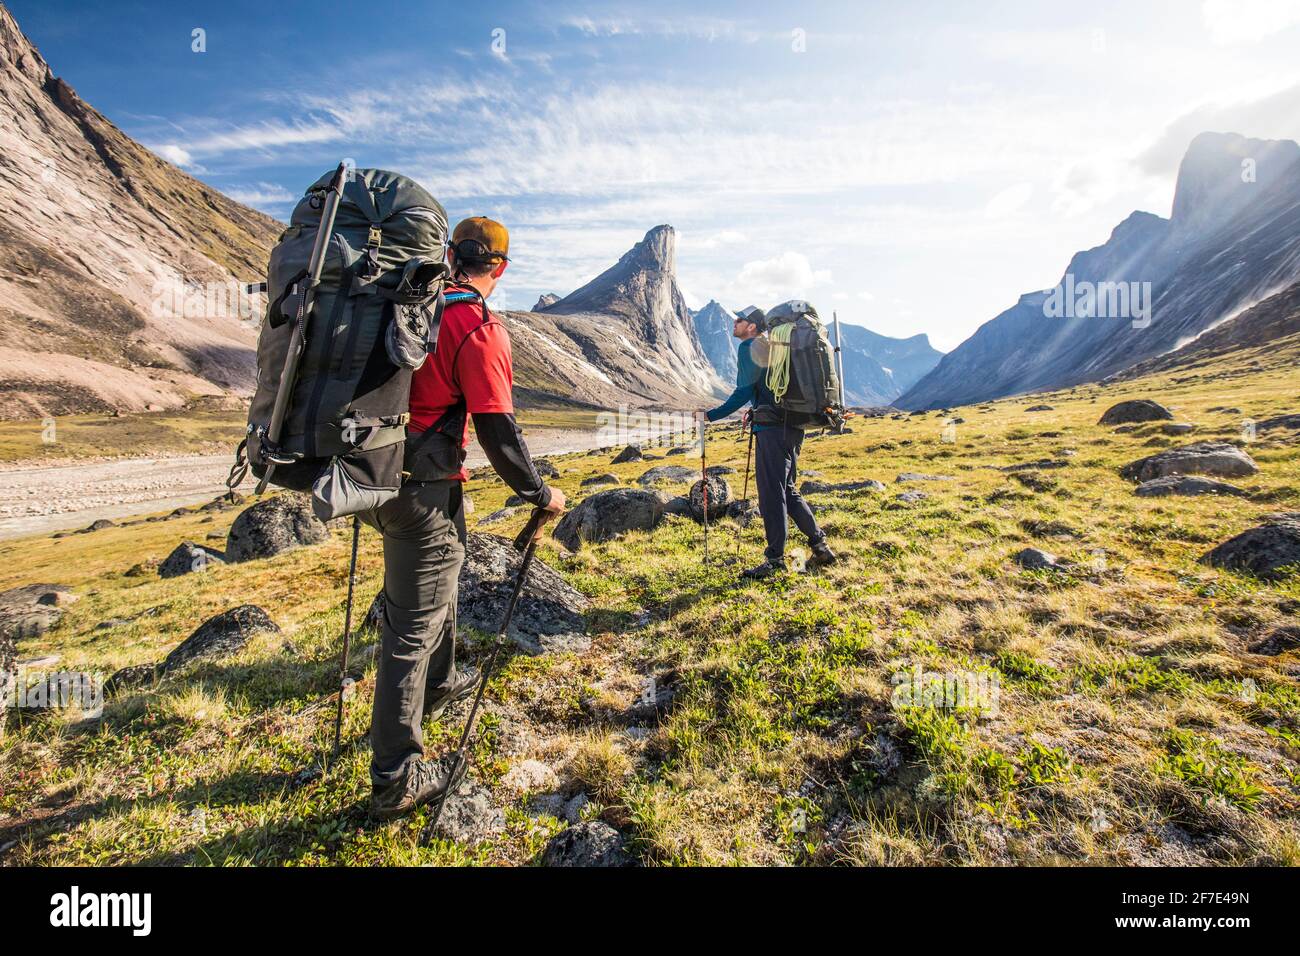 Backpackers stop to enjoy the views during a multi-day trip Stock Photo